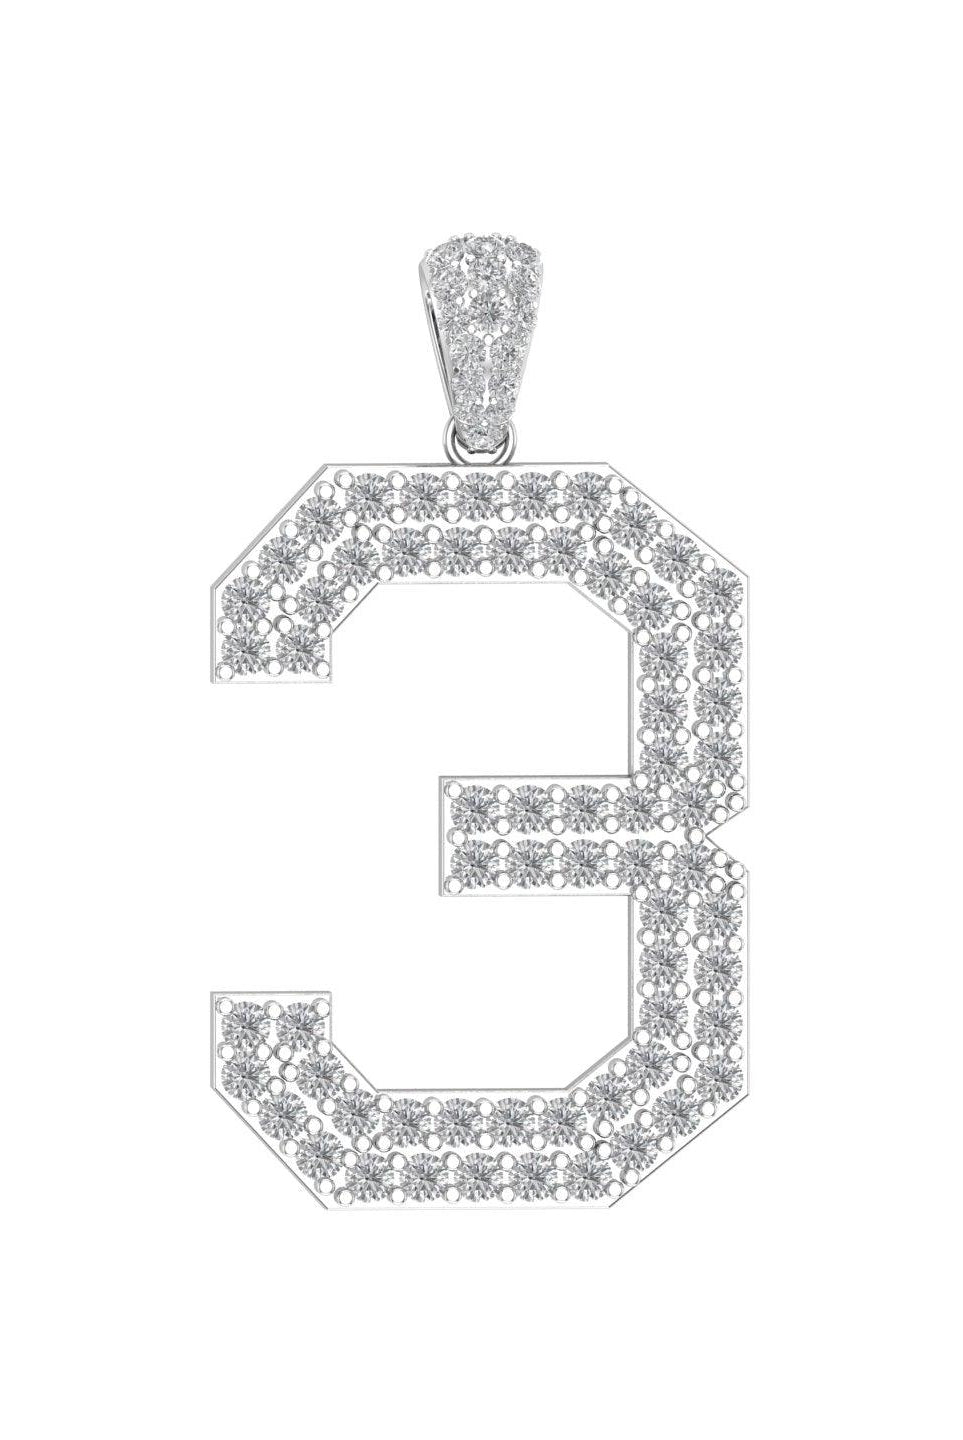 White Gold Color Pendant in the Shape of 3 Made of 925 Sterling Silver Material with 20 Inch Long Silver Chain